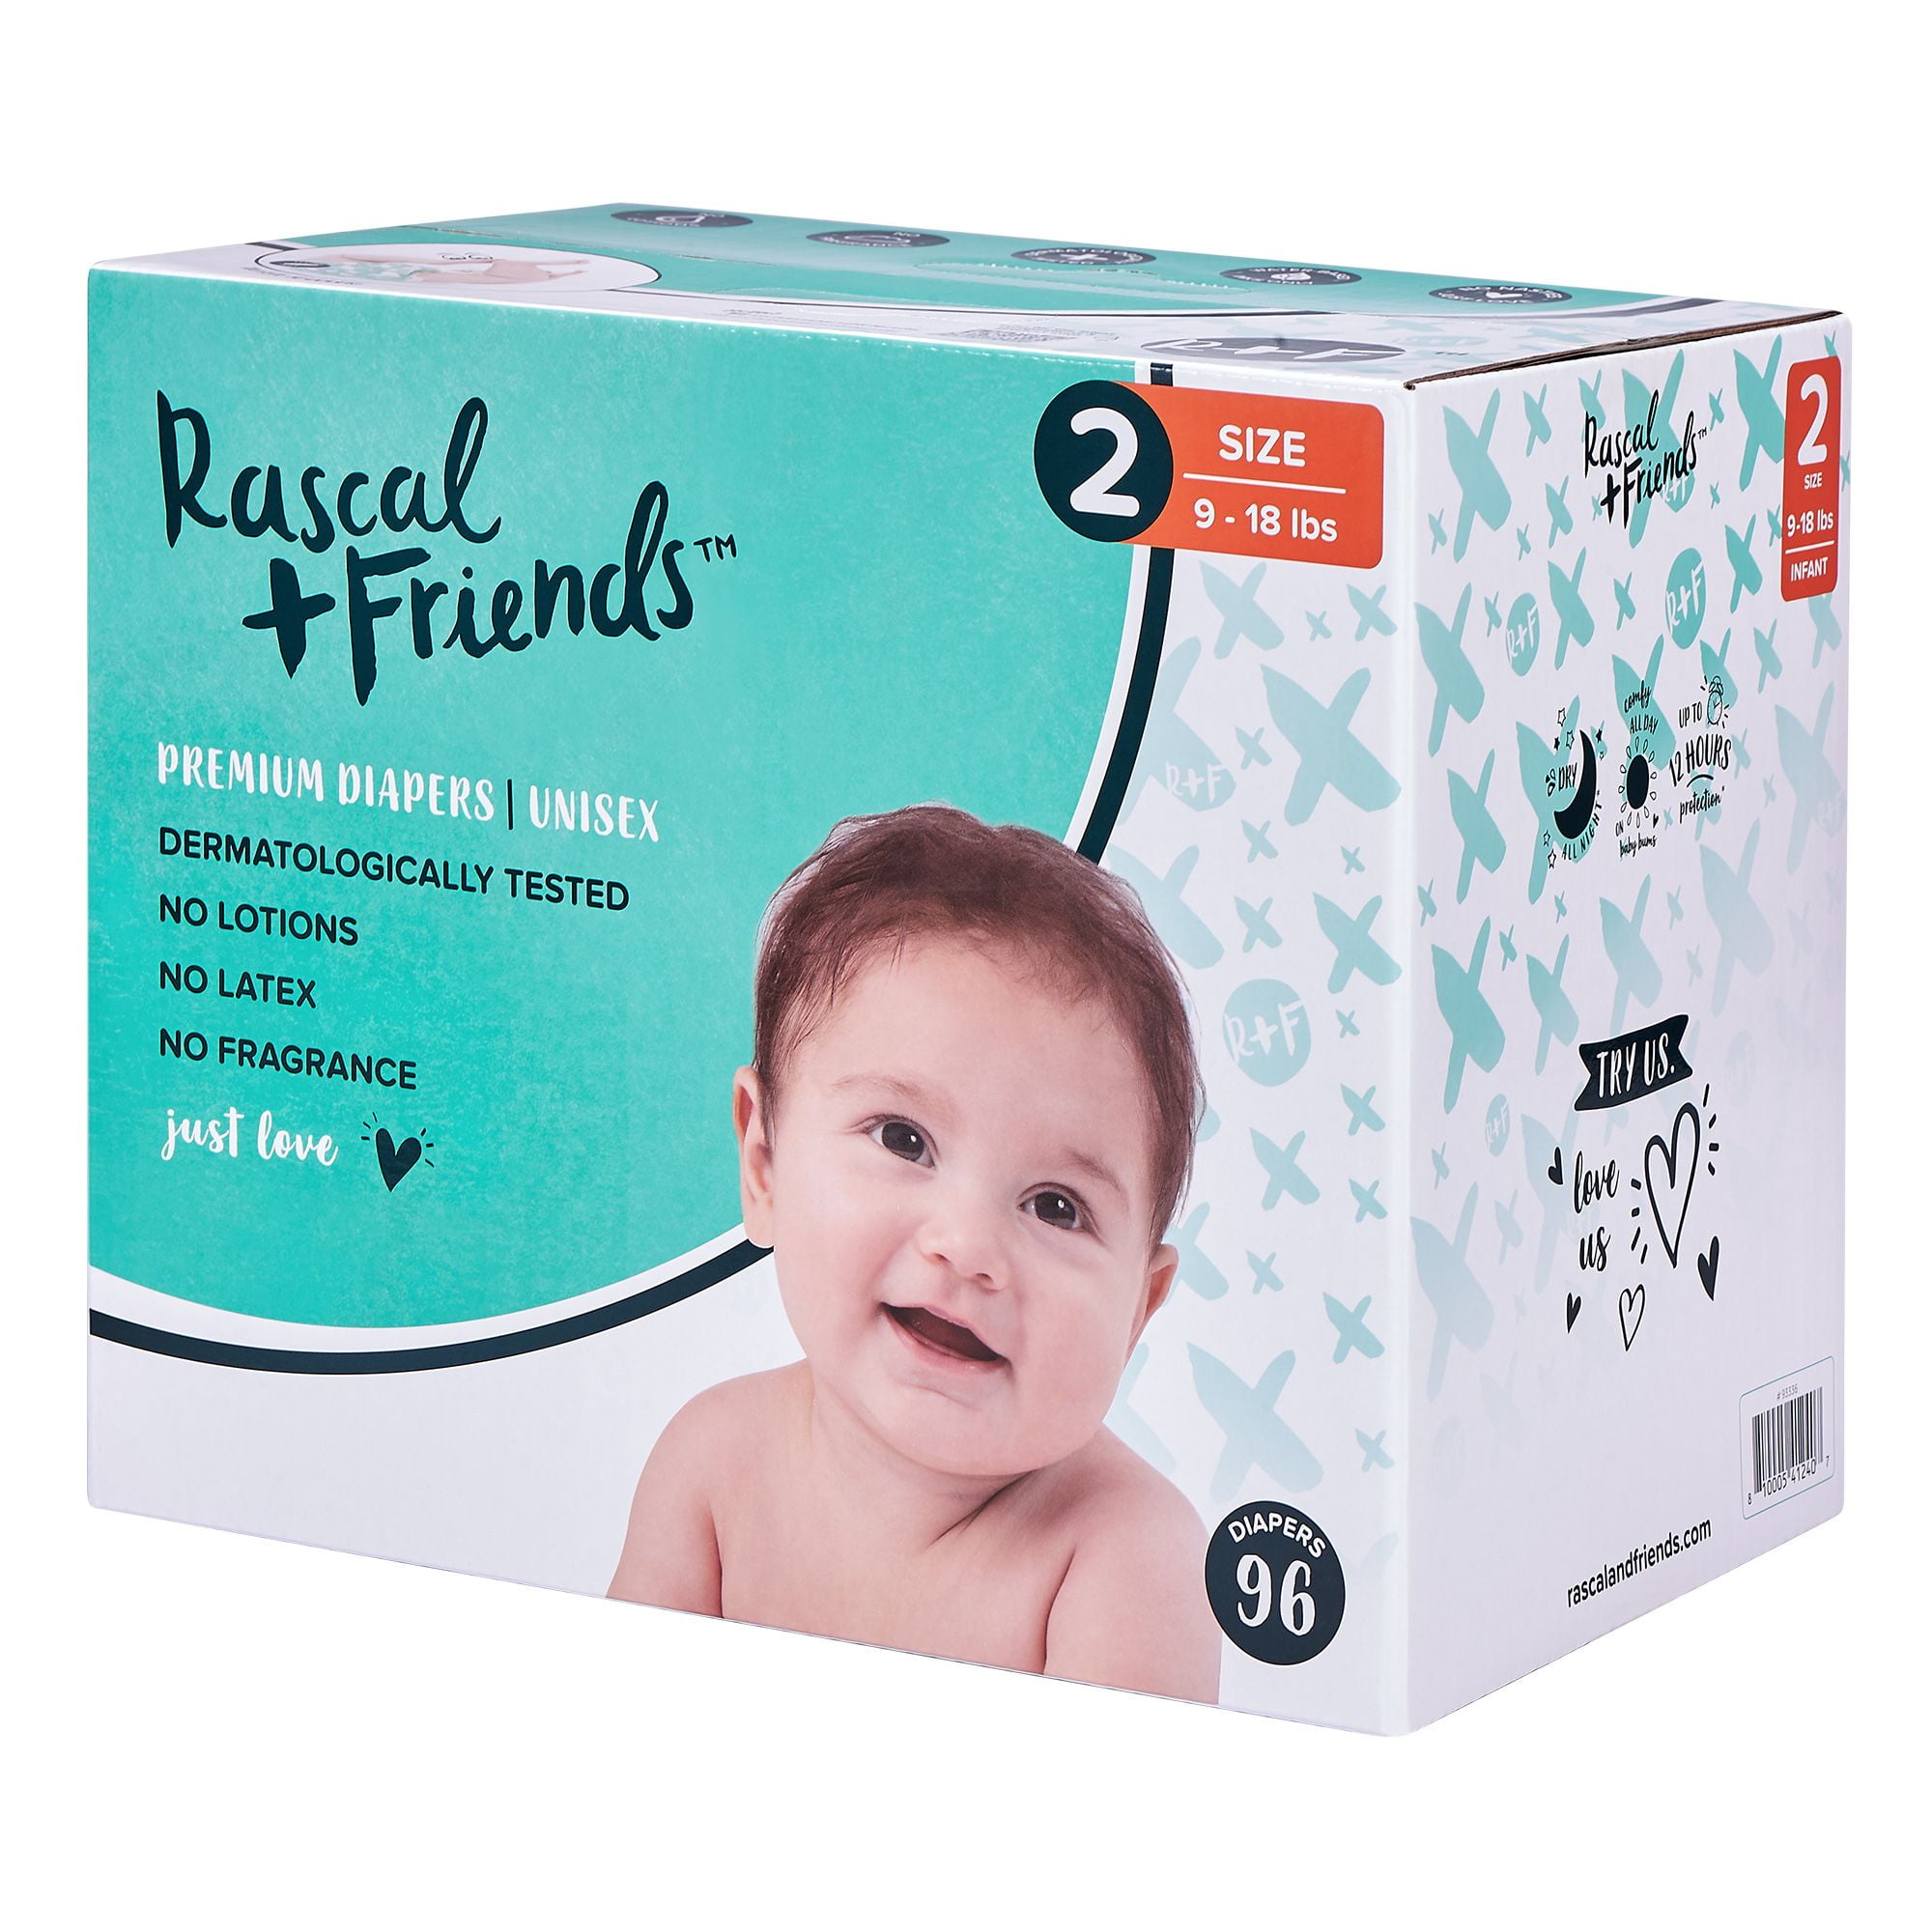 Rascal + Friends Premium Diapers, Size 2, 96 Count – Walmart Inventory ...